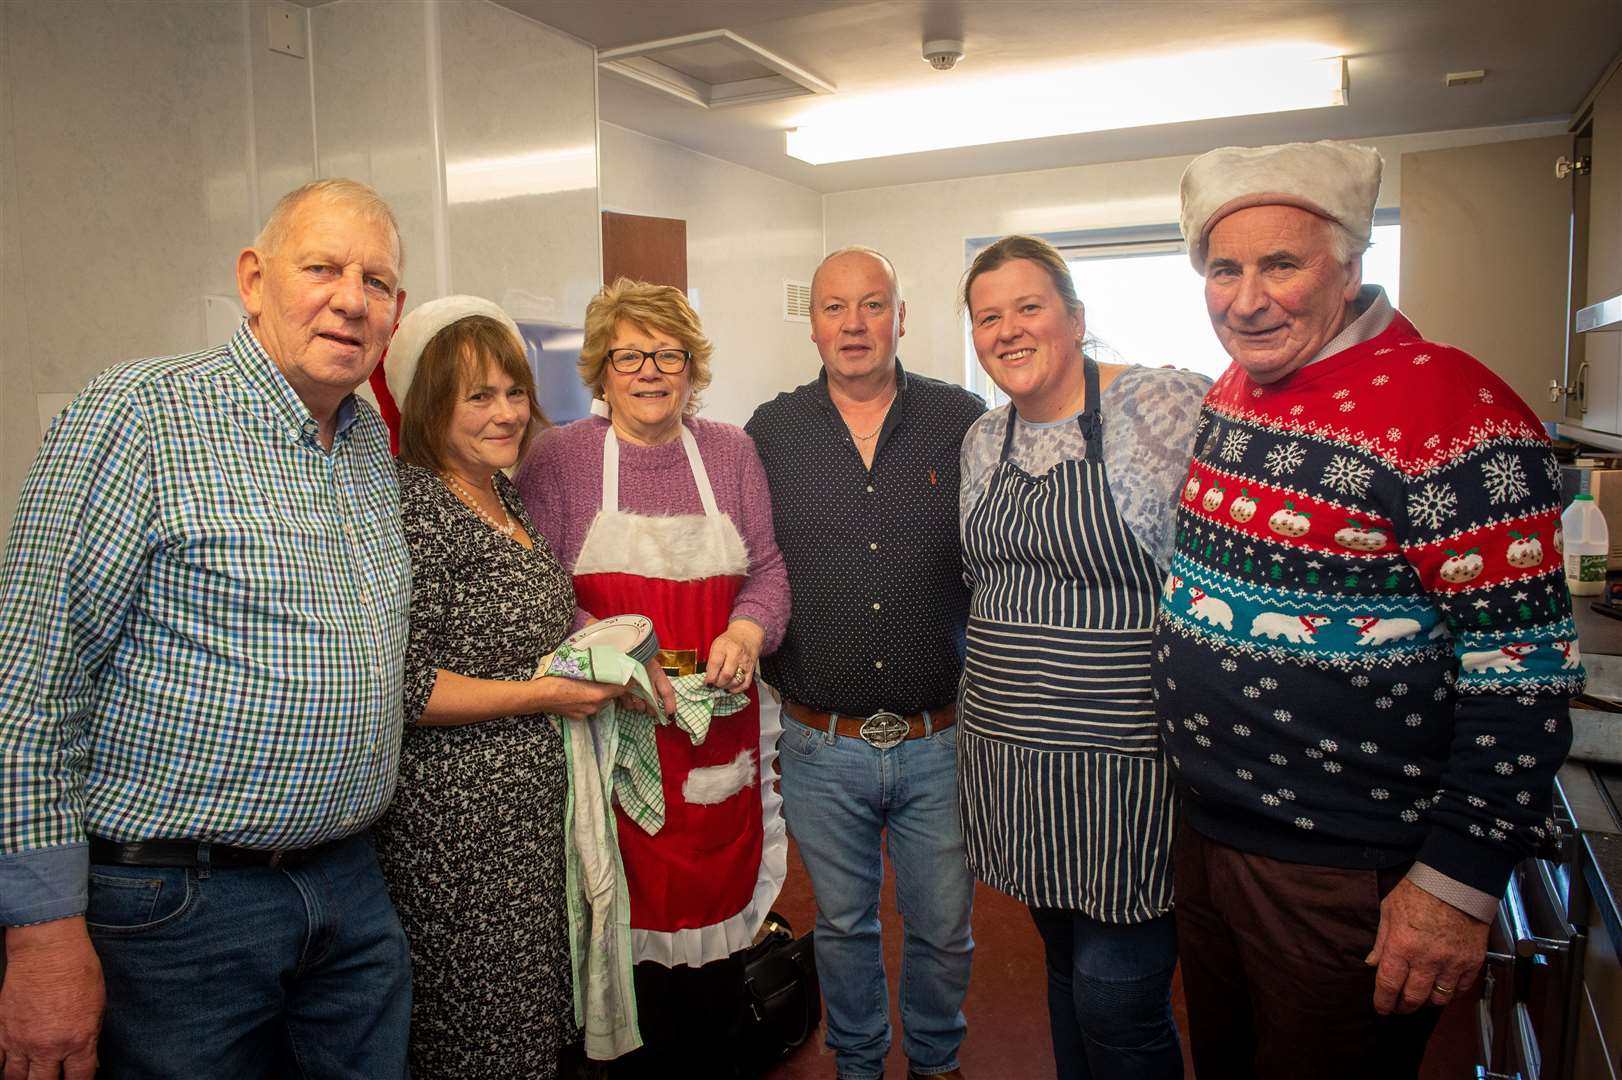 Members of the kitchen crew at North Kessock community hall pause for a picture during a successful fundraising breakfast with Santa event which raised a total of £1400 towards paying for a £60,000 care pod. Picture: Callum Mackay